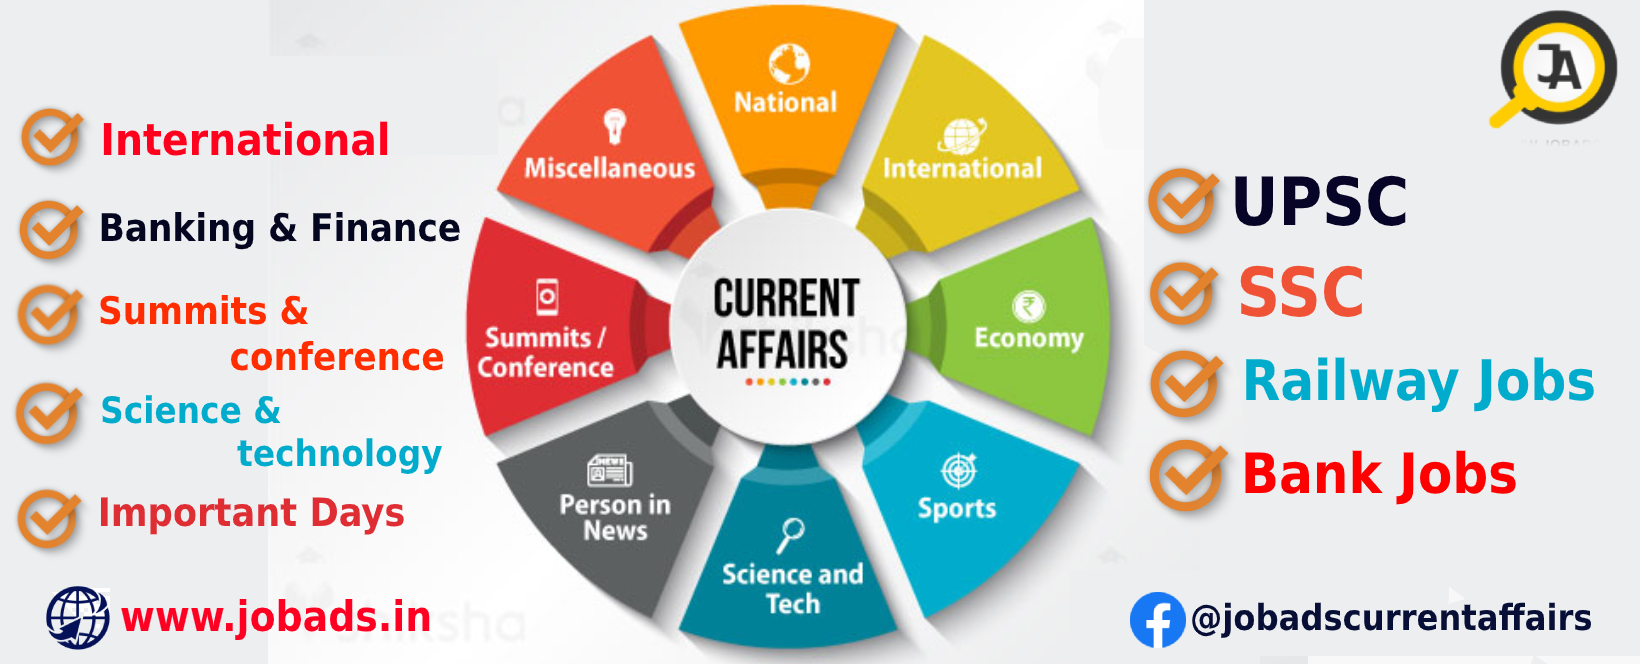 March 2021 Current Affairs